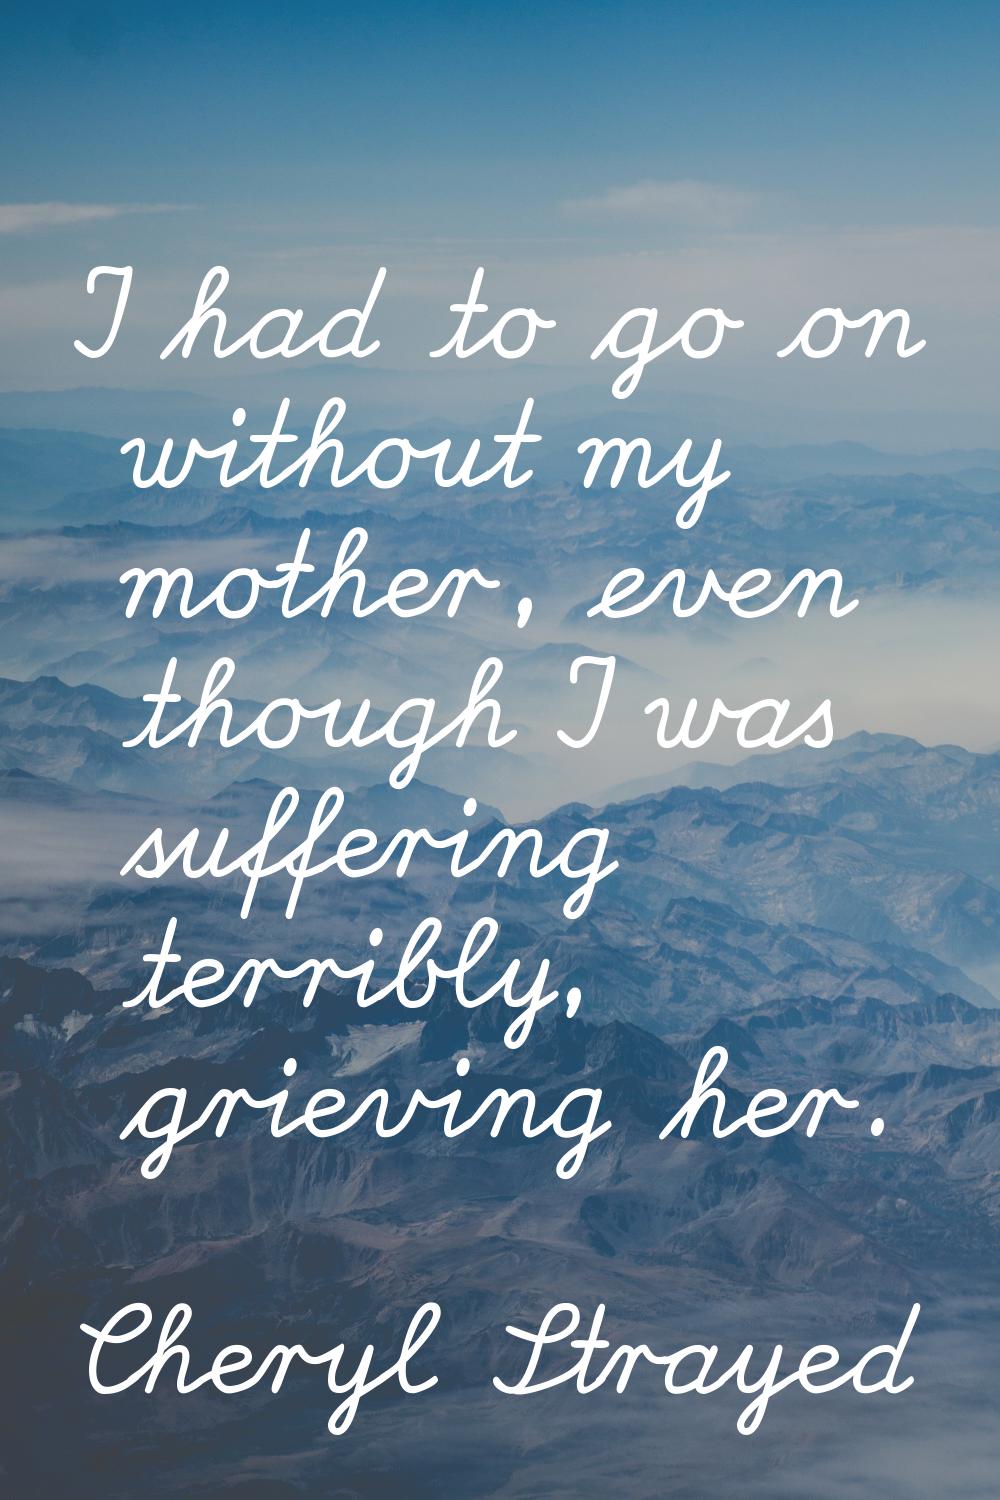 I had to go on without my mother, even though I was suffering terribly, grieving her.